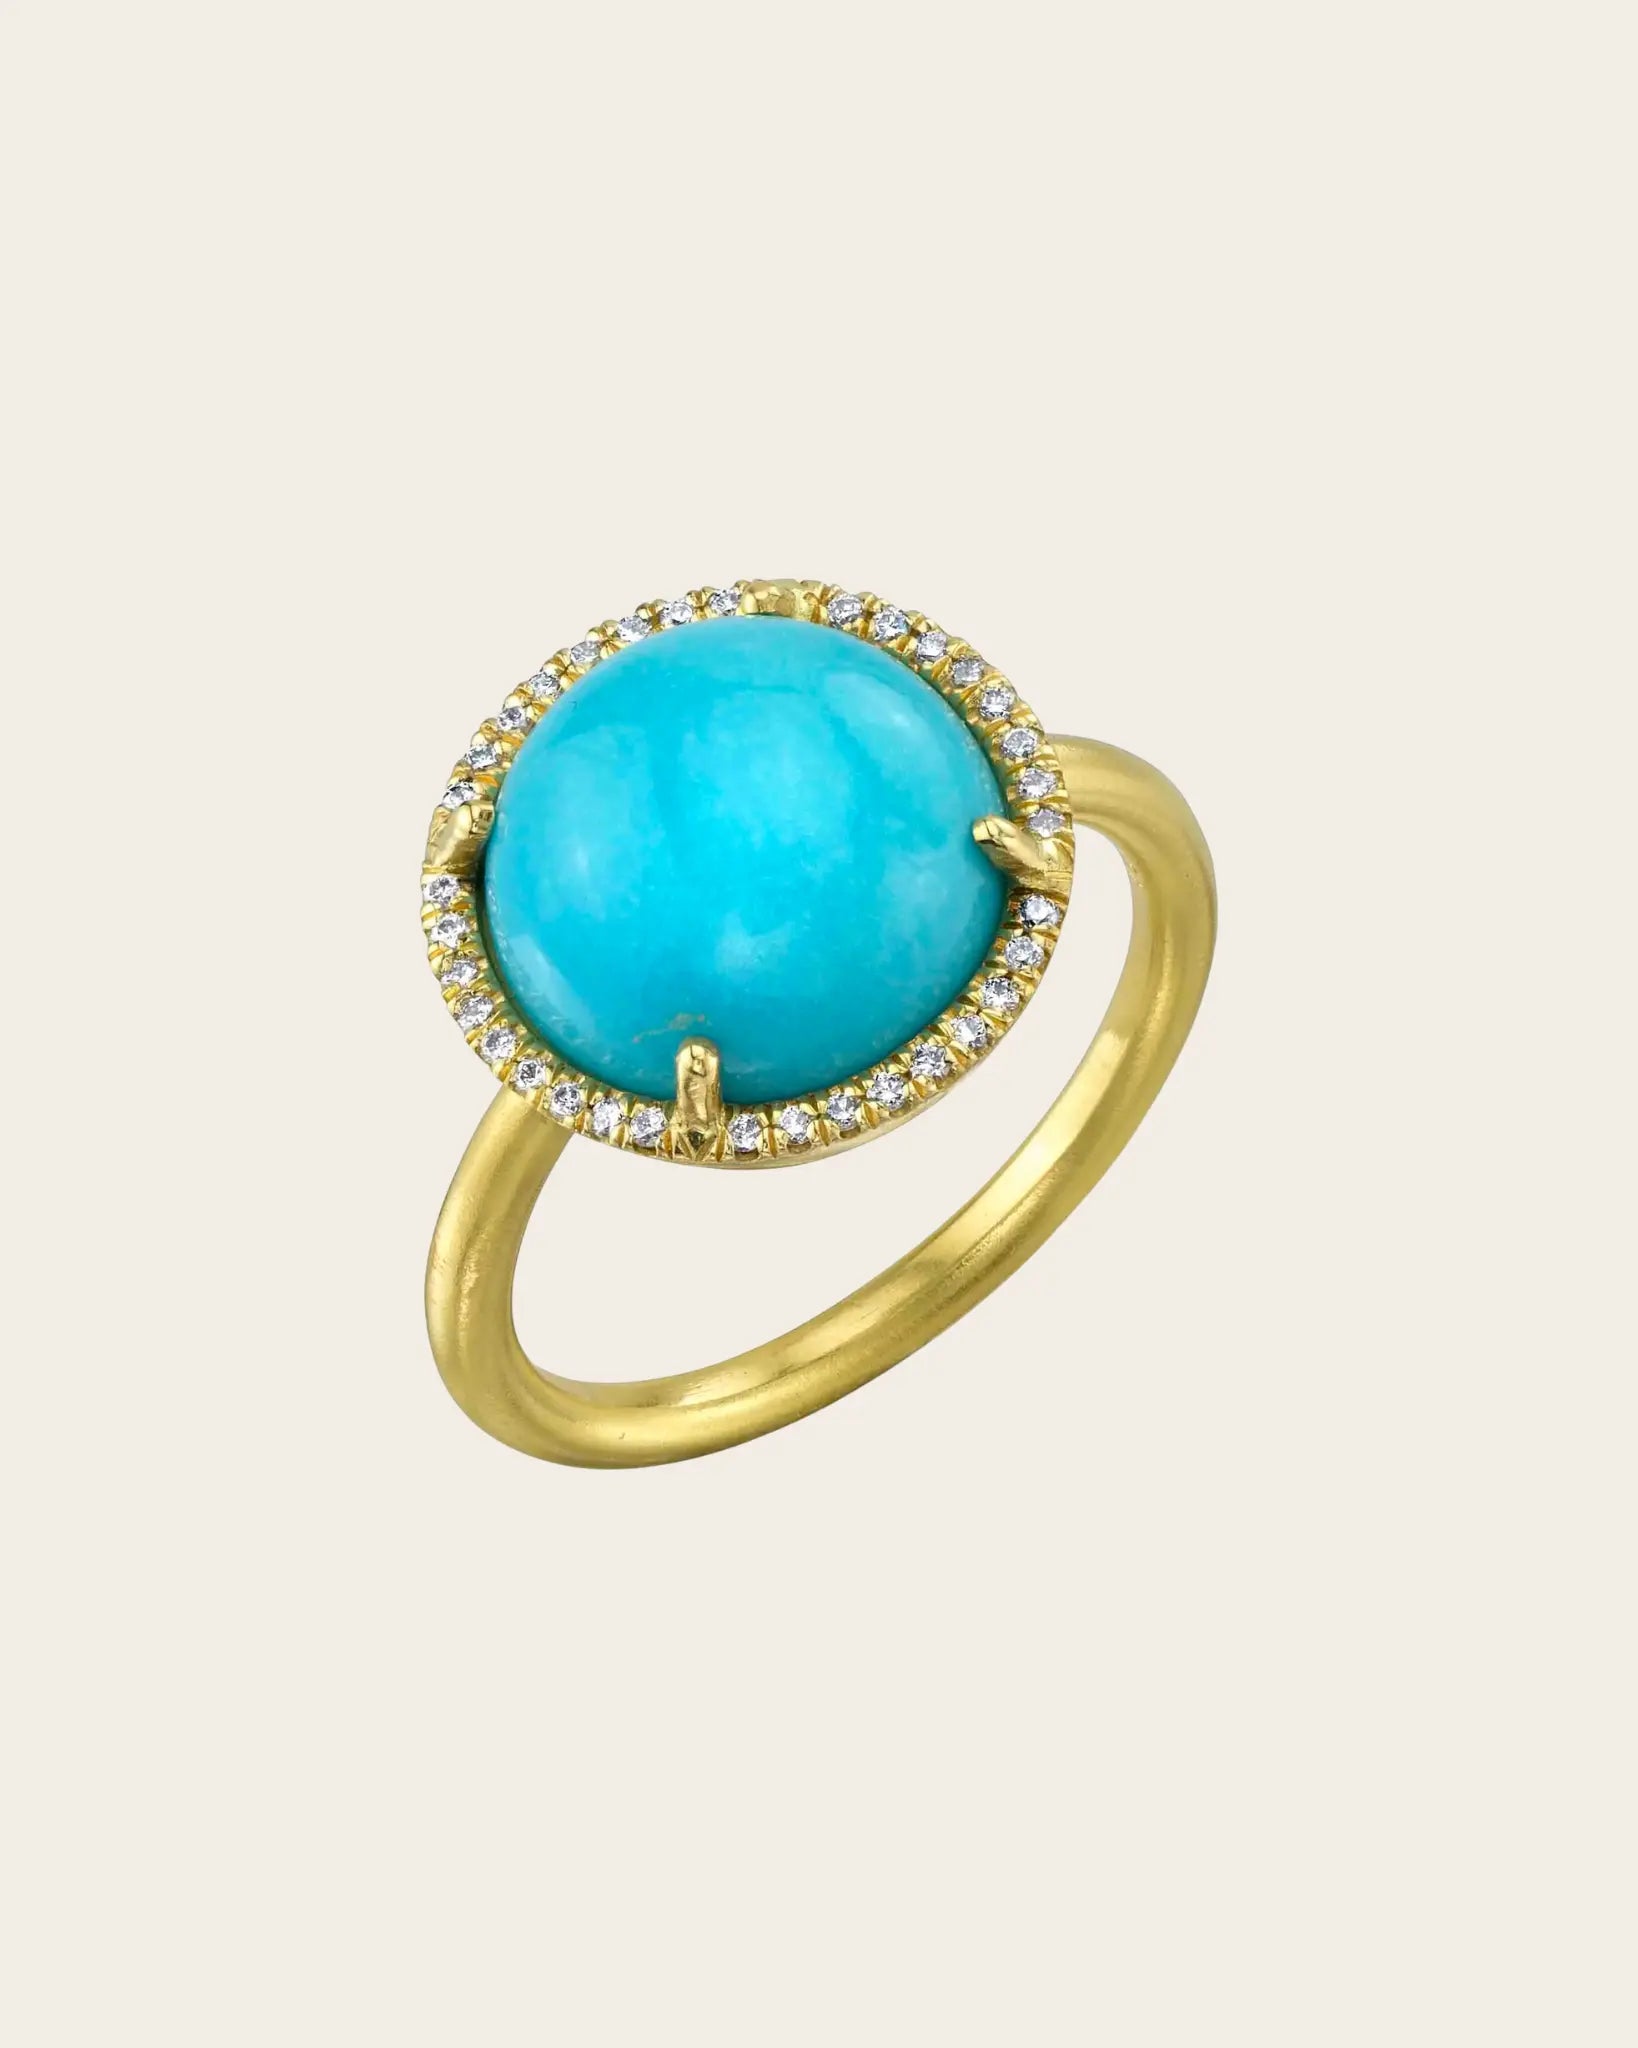 Turquoise and Pave Diamond Ring Turquoise and Pave Diamond Ring Irene Neuwirth Irene Neuwirth  Squash Blossom Vail